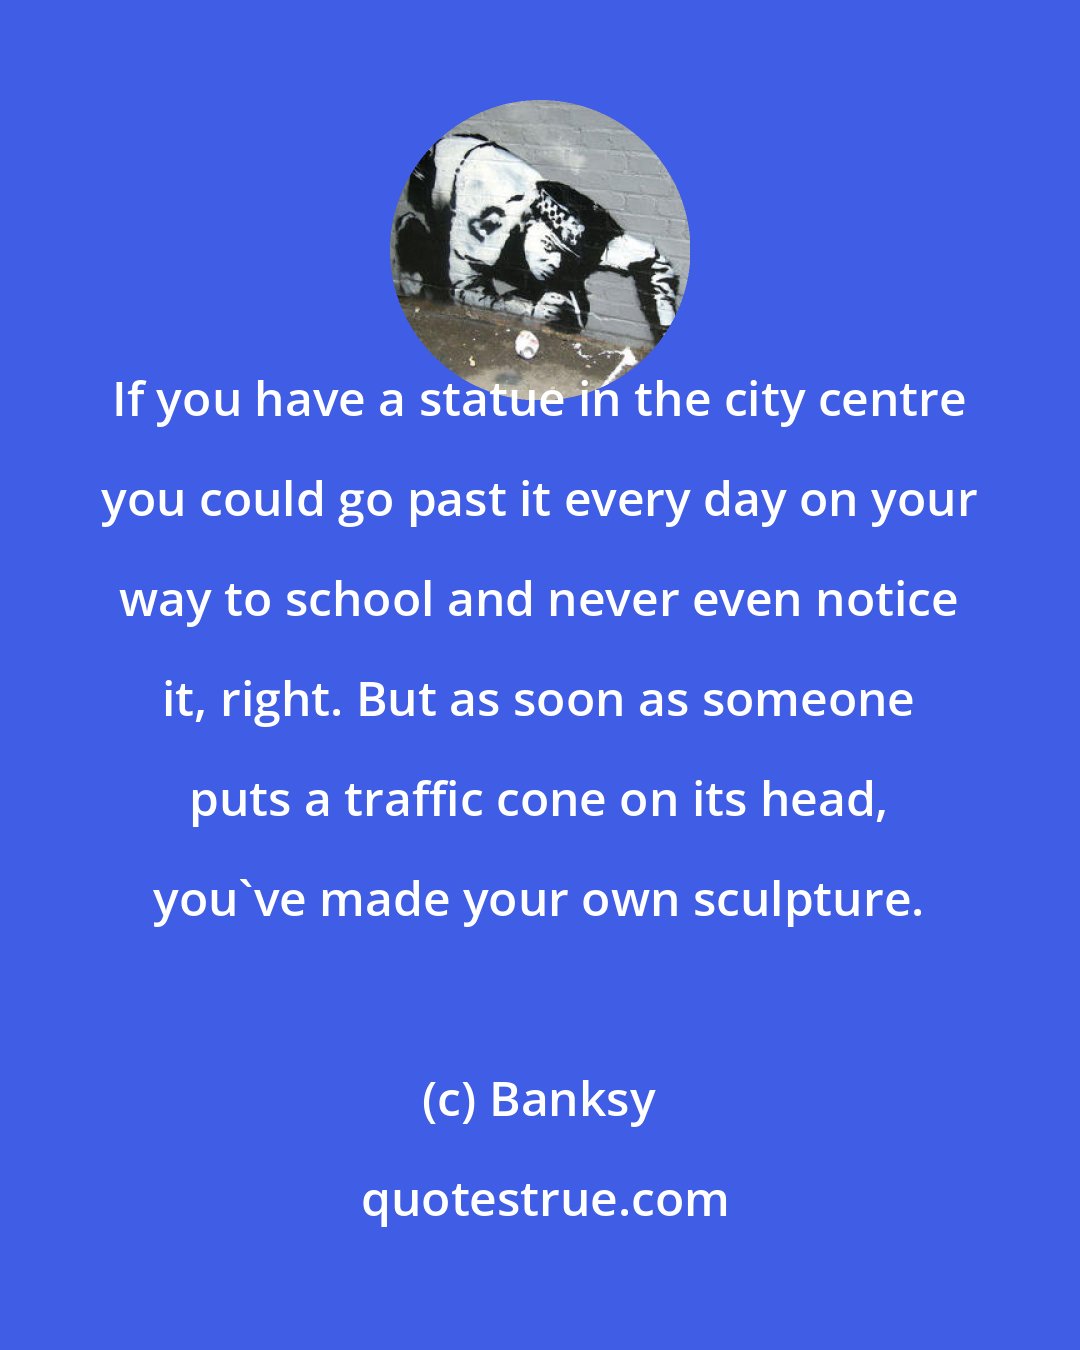 Banksy: If you have a statue in the city centre you could go past it every day on your way to school and never even notice it, right. But as soon as someone puts a traffic cone on its head, you've made your own sculpture.